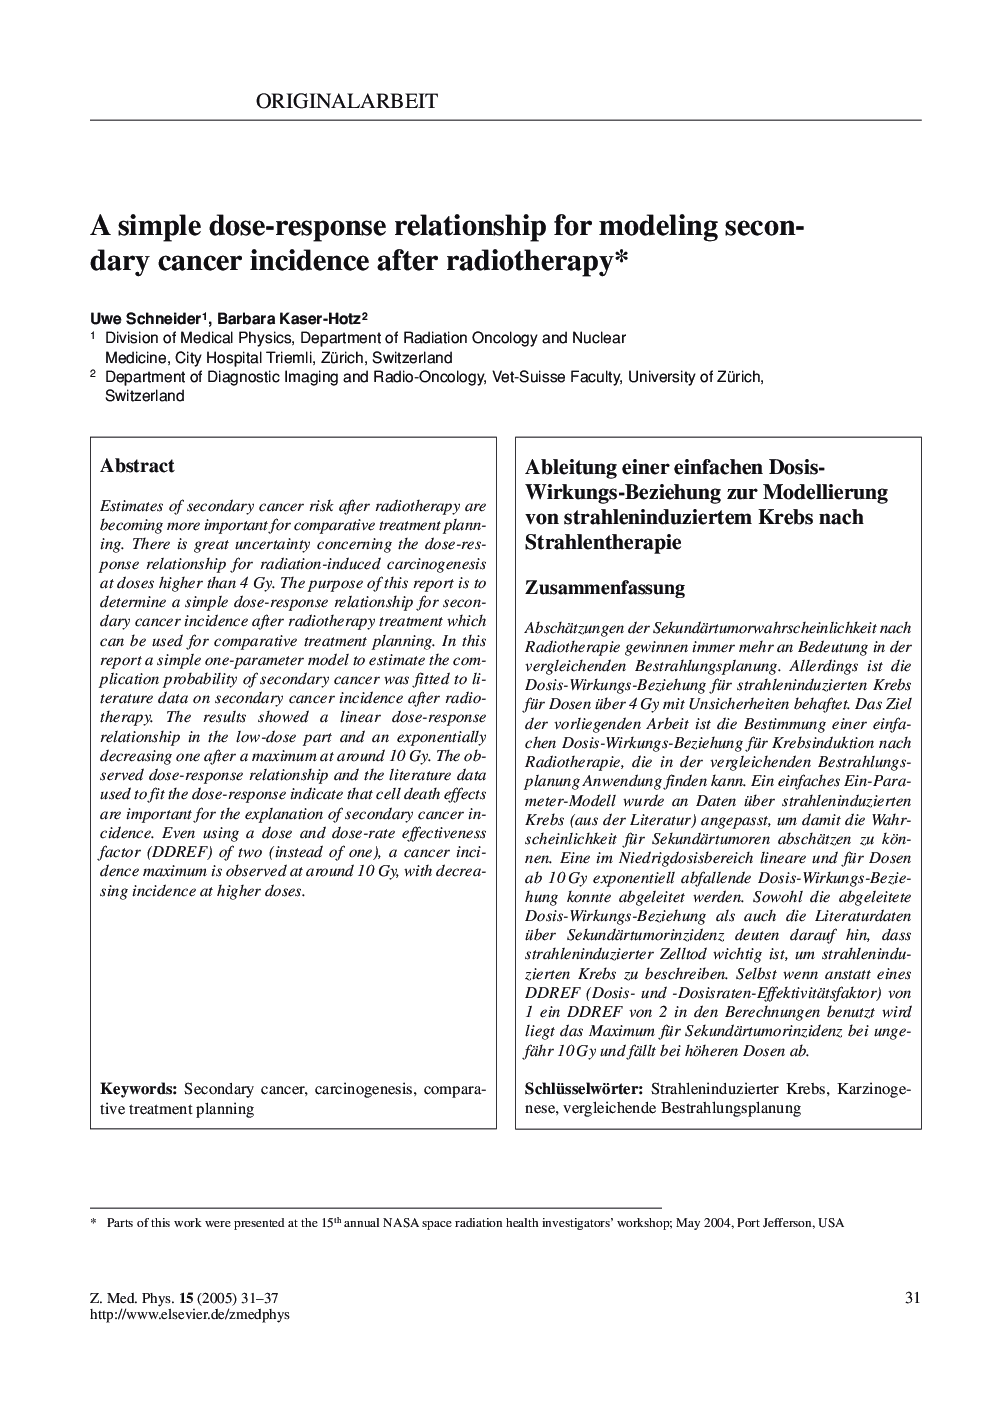 A simple dose-response relationship for modeling secondary cancer incidence after radiotherapy*